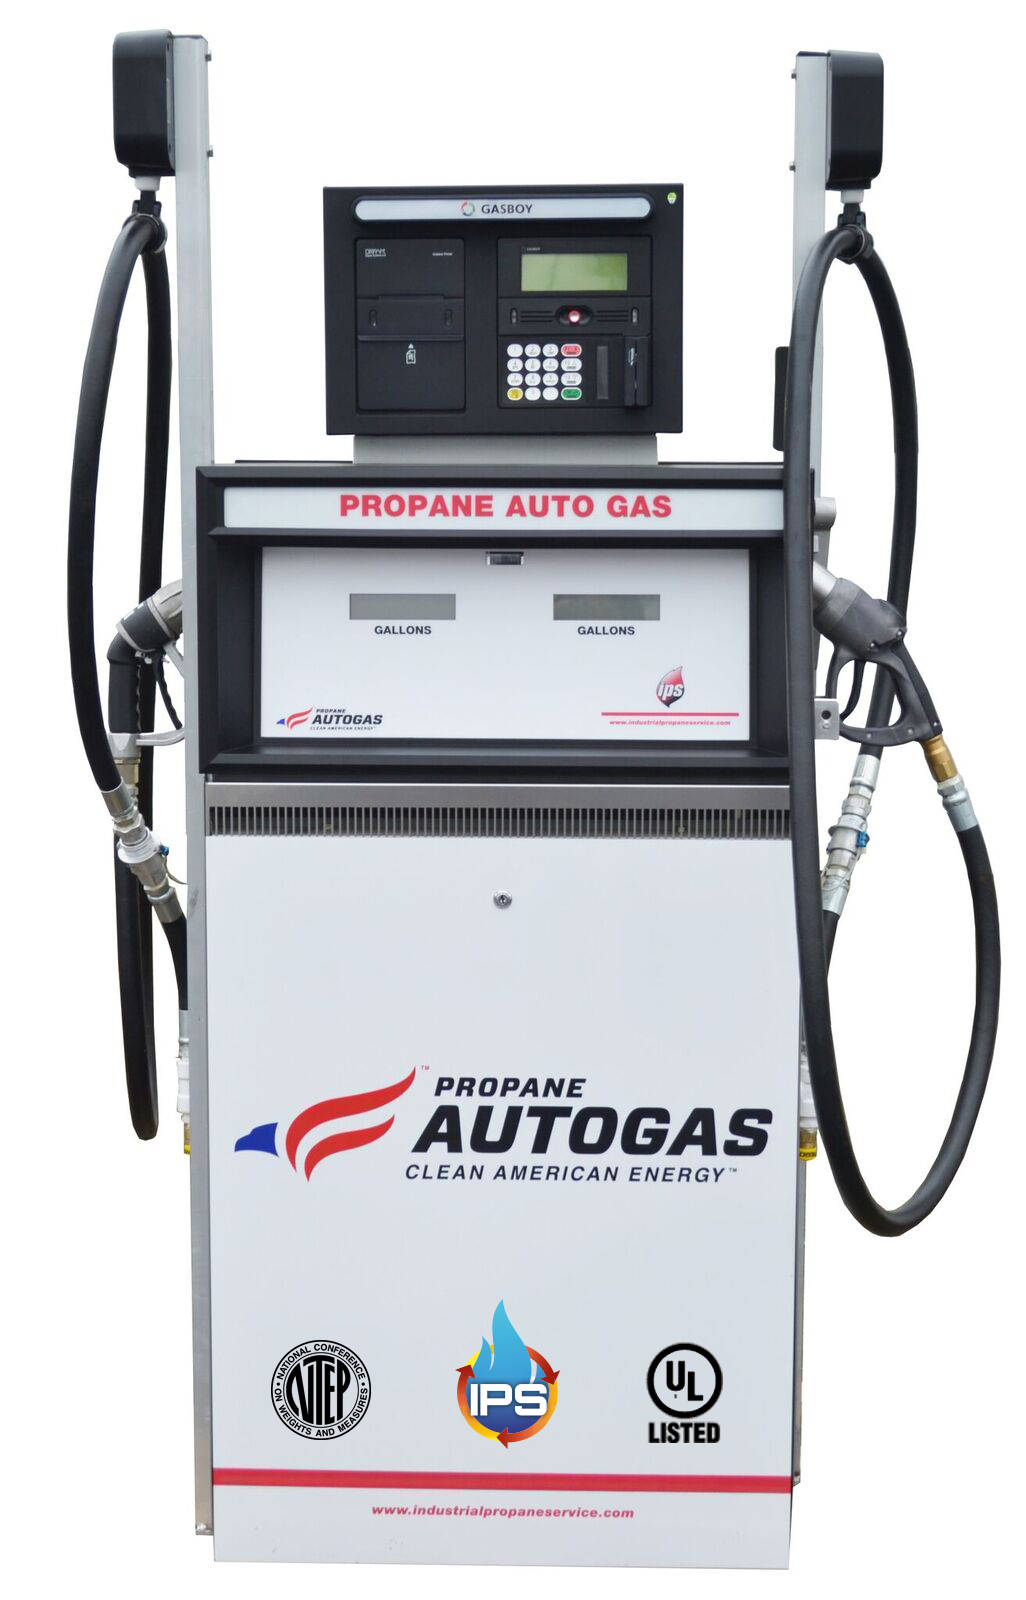 IPS Equipment, a full line equipment distributor for the propane industry receives UL certification for its Gasboy Propane Autogas Dispensing Unit (BPN magazine 082018)